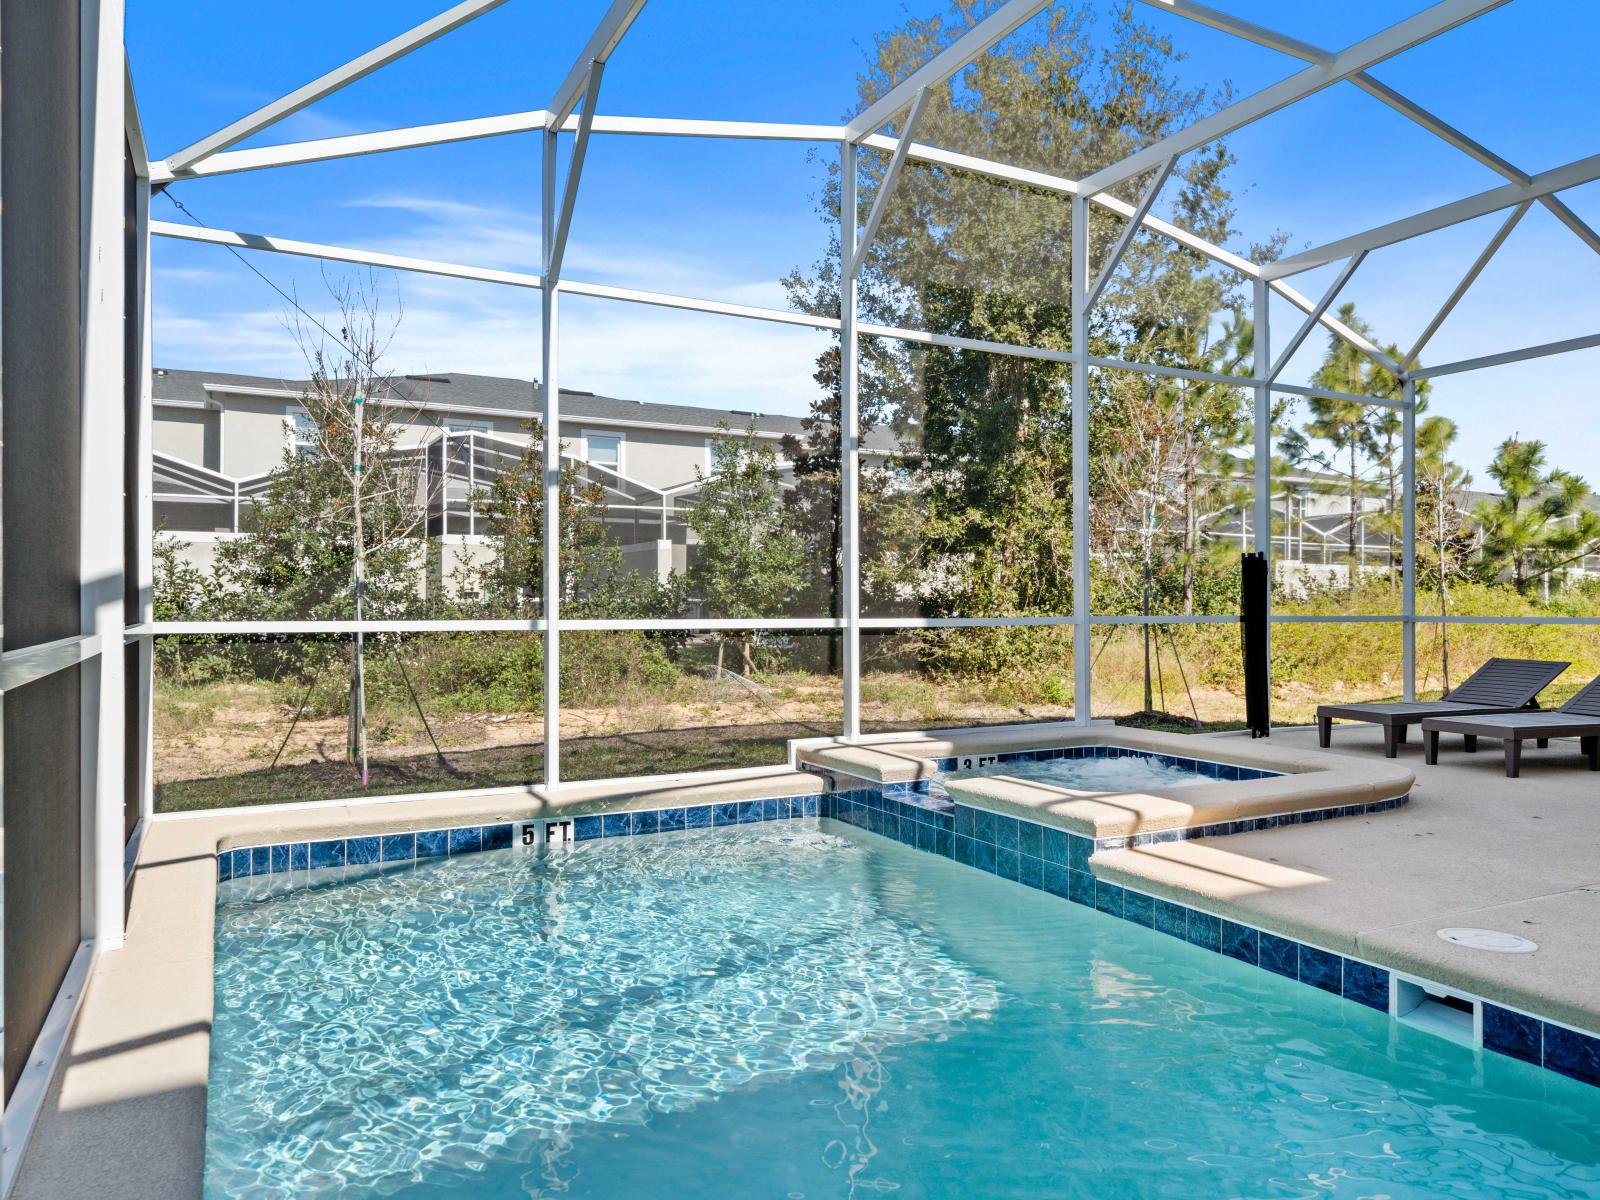 Private Pool of the Home in Davenport Florida - Relax by the shimmering poolside oasis - Bask in sun-kissed luxury near the water - Enjoy leisurely moments in inviting pool area